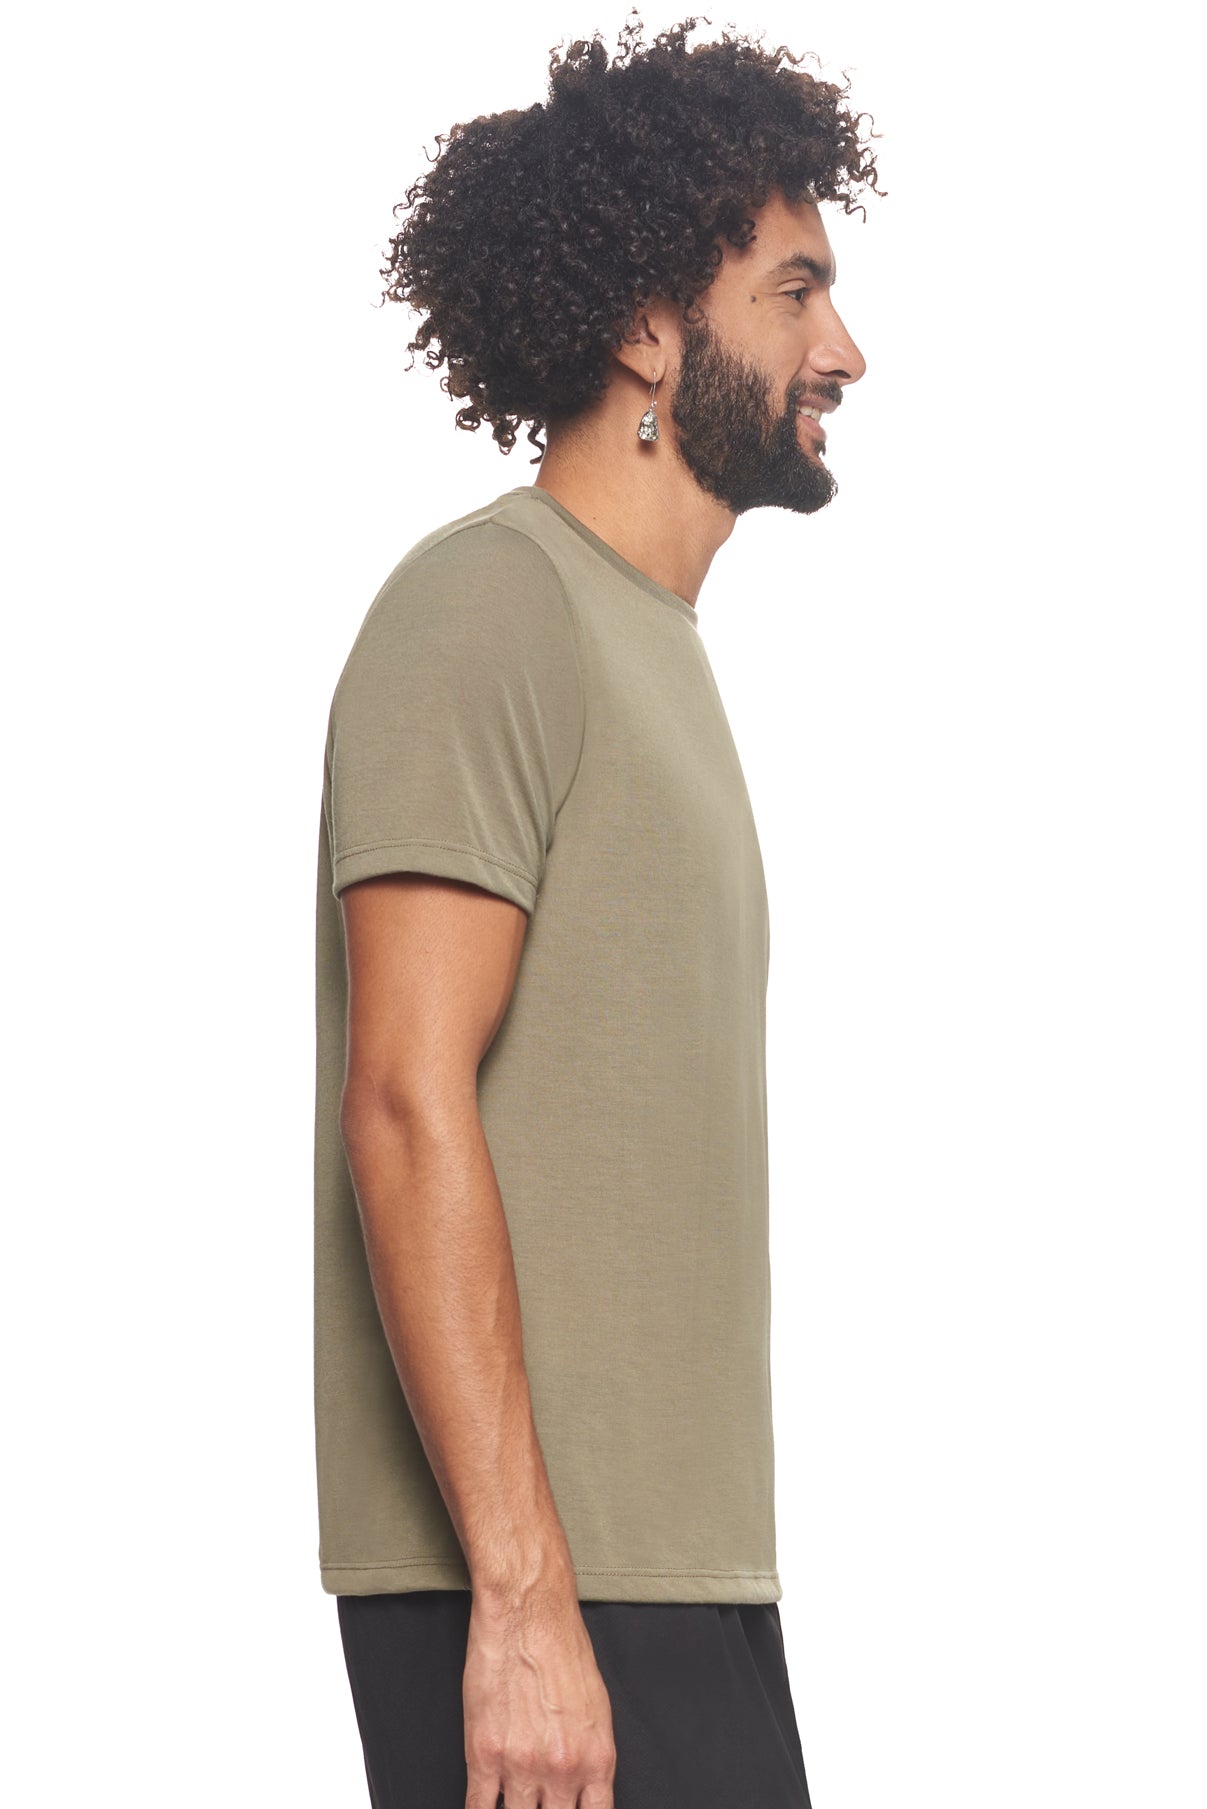 Expert Brand Retail Super Soft Eco-Friendly Performance Apparel Fashion Sportswear Men's Crewneck T-Shirt Made in USA olive green 2#color_olive